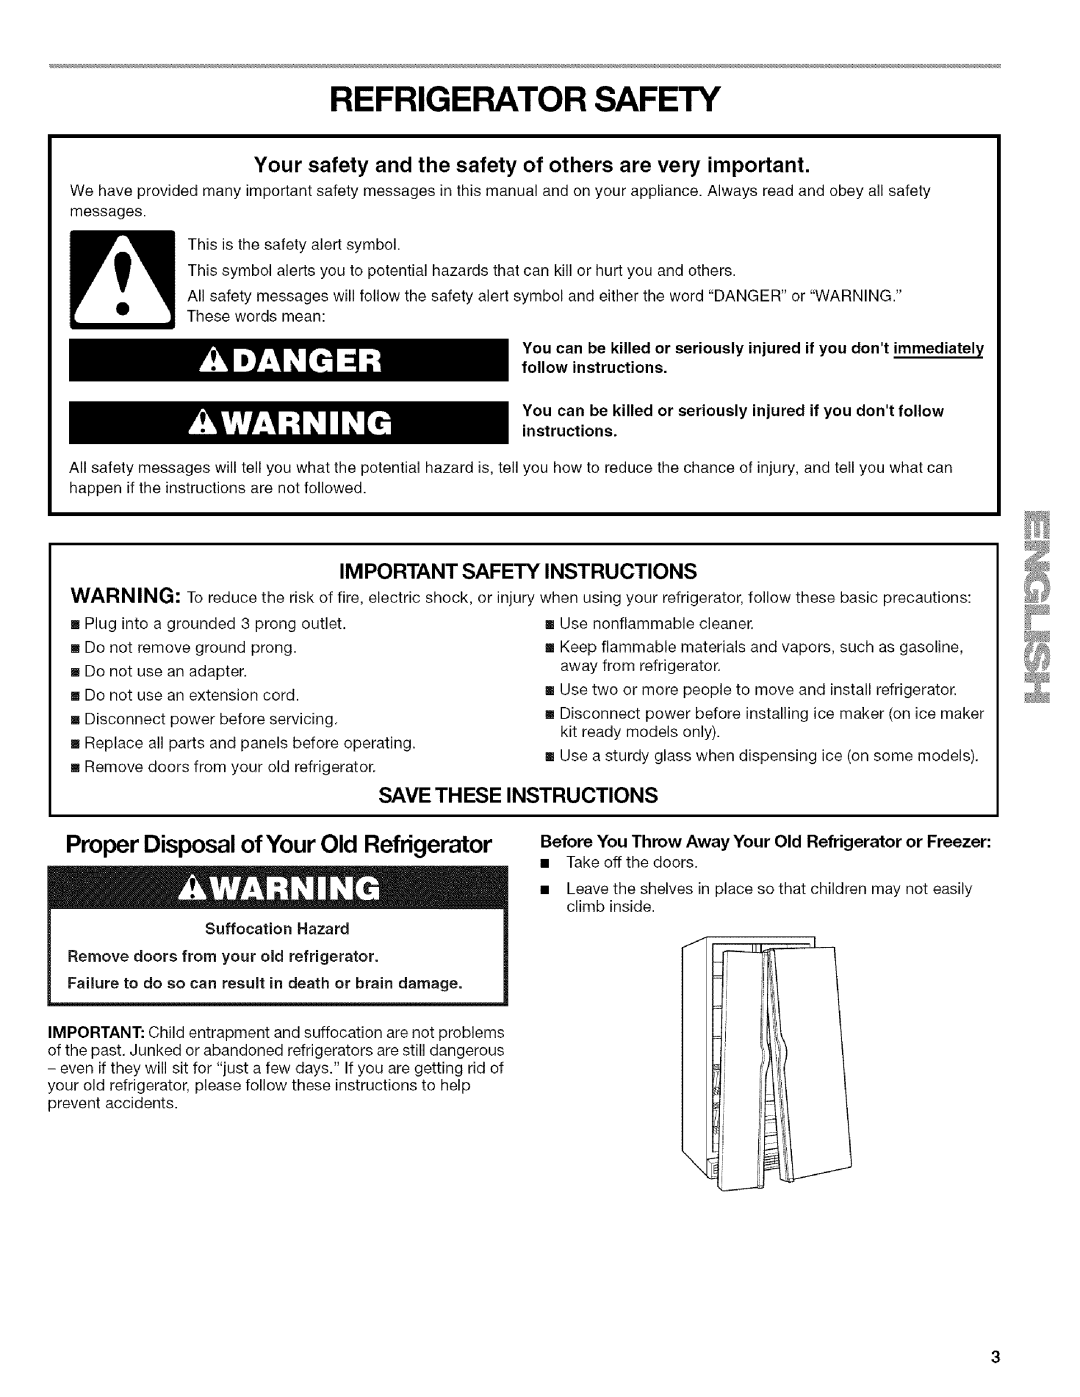 Kenmore w10144349A manual Refrigerator Safety, Proper Disposal of Your Old Refrigerator, Important Safety, Instructions 